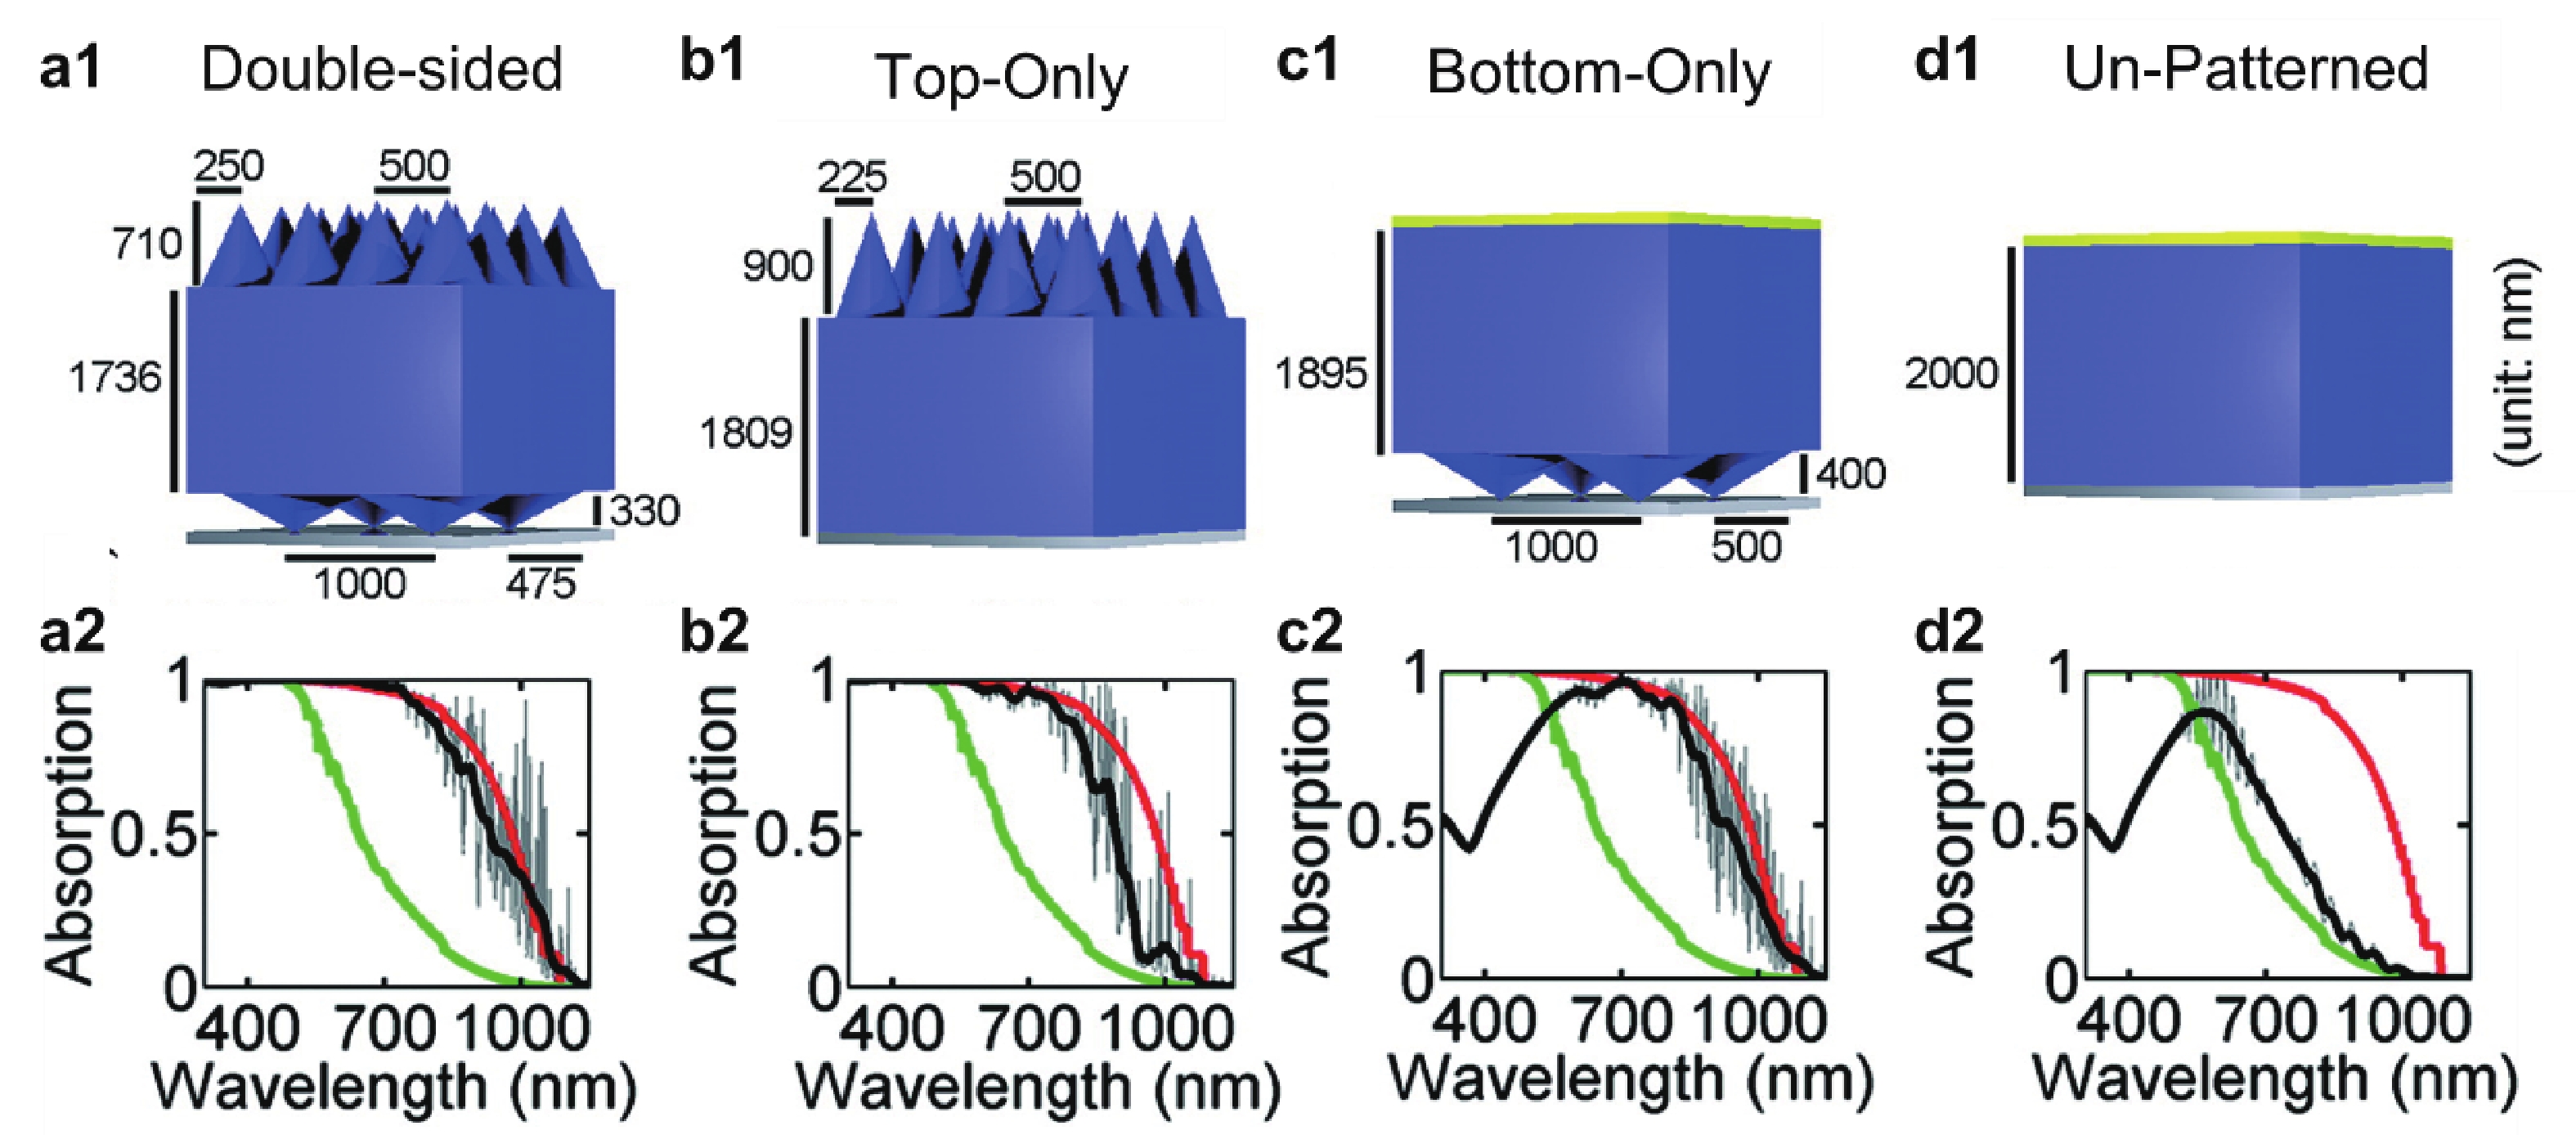 (Color online) Three-dimensional (3D) nanostructured silicon solar cells and their corresponding absorption spectra. (a1, a2) Double-sided nanostructure. (b1, b2) Top-only nanostructure. (c1, c2) Bottom-only nanostructure. (d1, d2) Flat film. Red curves stand for the Yablonovitch limit, green curves are the single-pass absorption spectra, and black curves represent spectra for corresponding structures. Reproduced with permission[31]. Copyright 2014, Wiley-VCH.